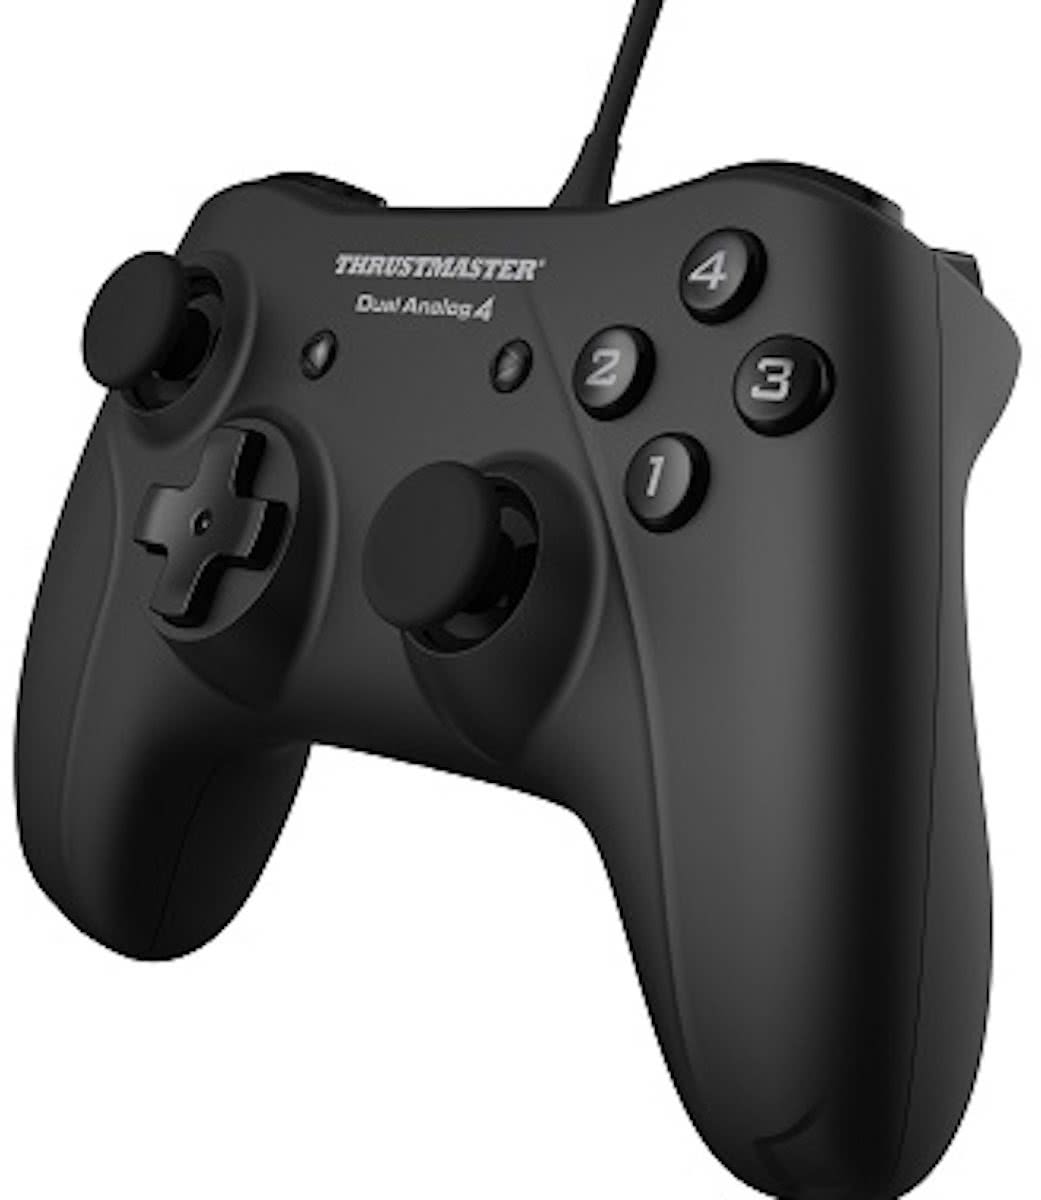 Thrustmaster Dual Analog 4 Wired Controller